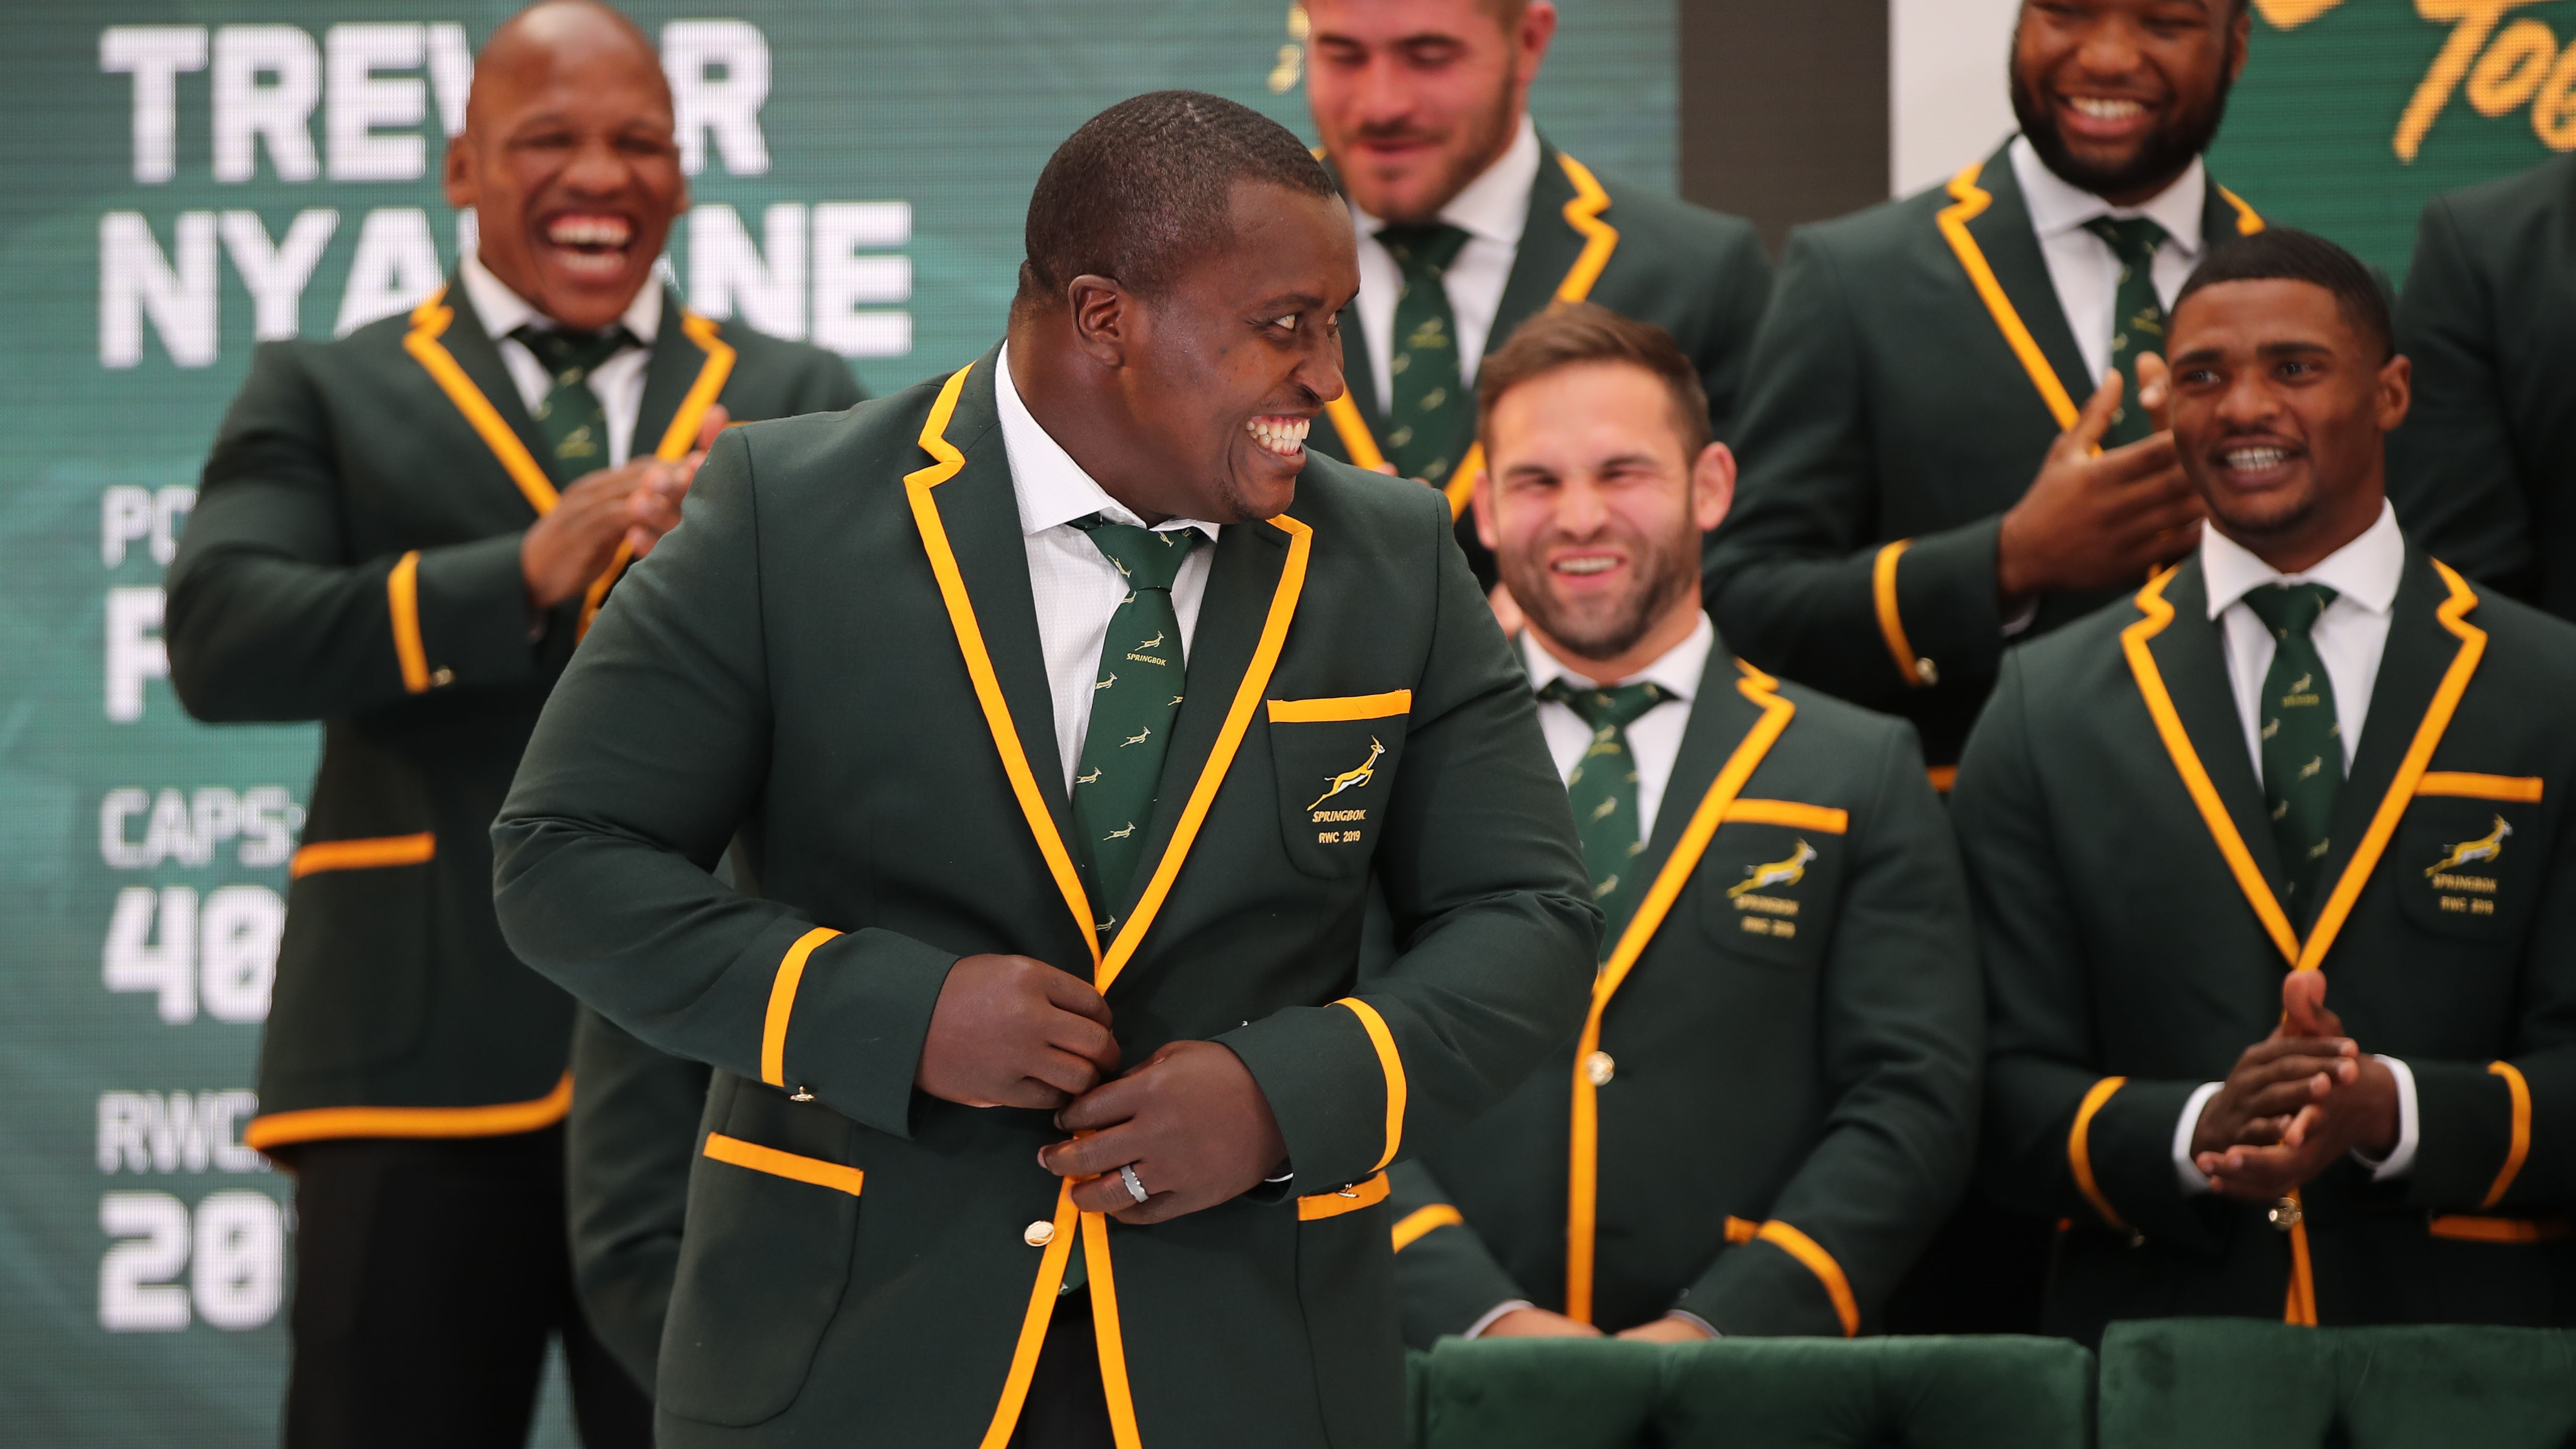 Trevor Nyakane of South Africa during the 2019 Springbok Squad Announcement at Ulwazi Centre MultiChoice City, Johannesburg, on 26 August 2019 ©Samuel Shivambu/BackpagePix